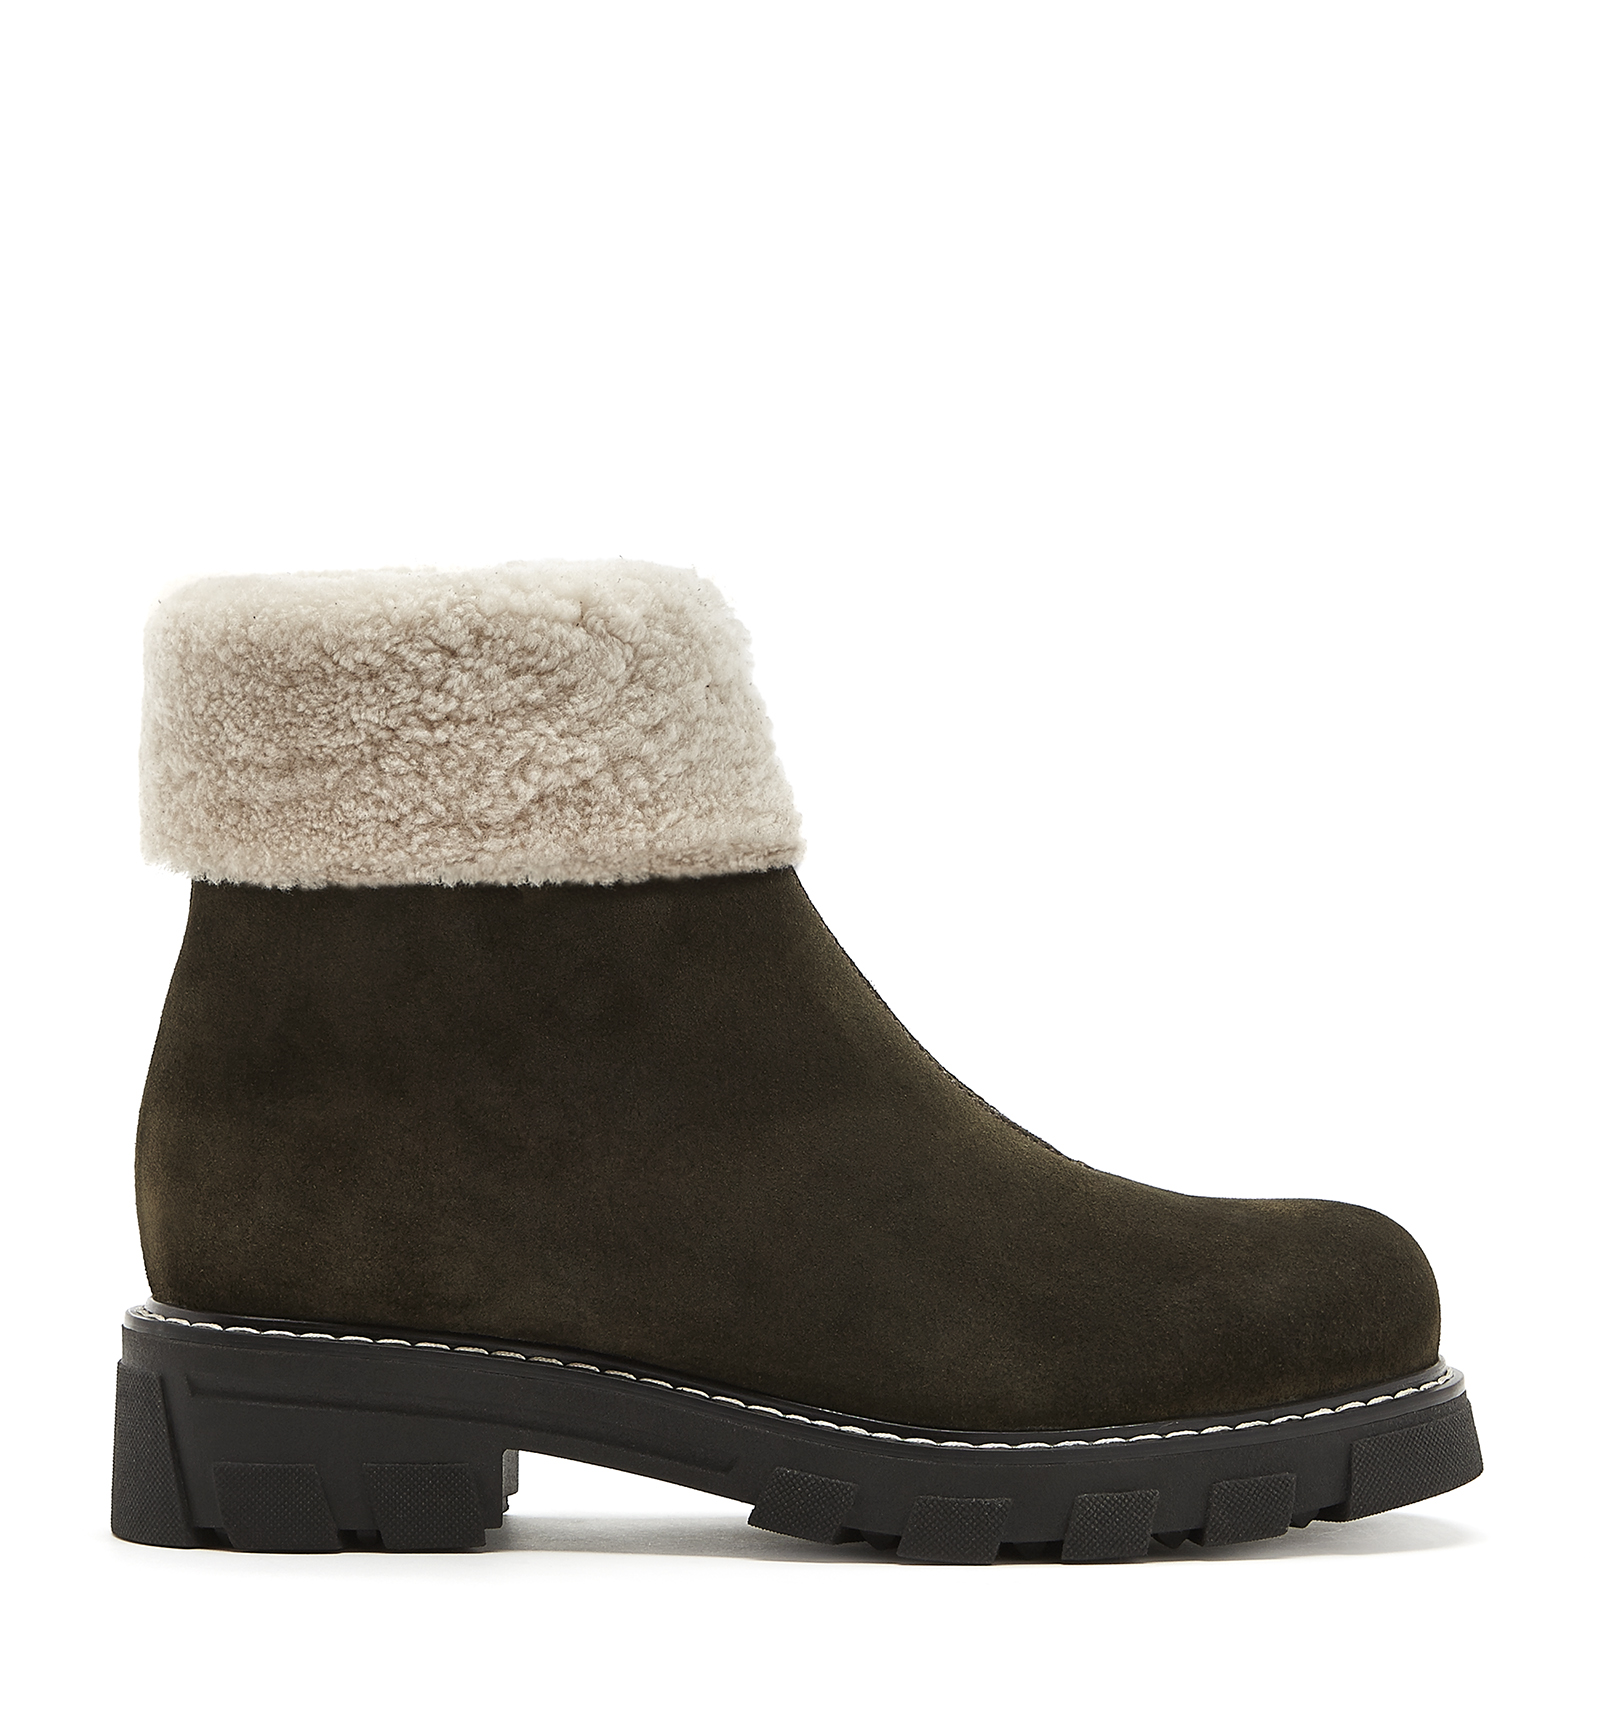 La Canadienne Abba X You Shearling Lined Bootie In Khaki